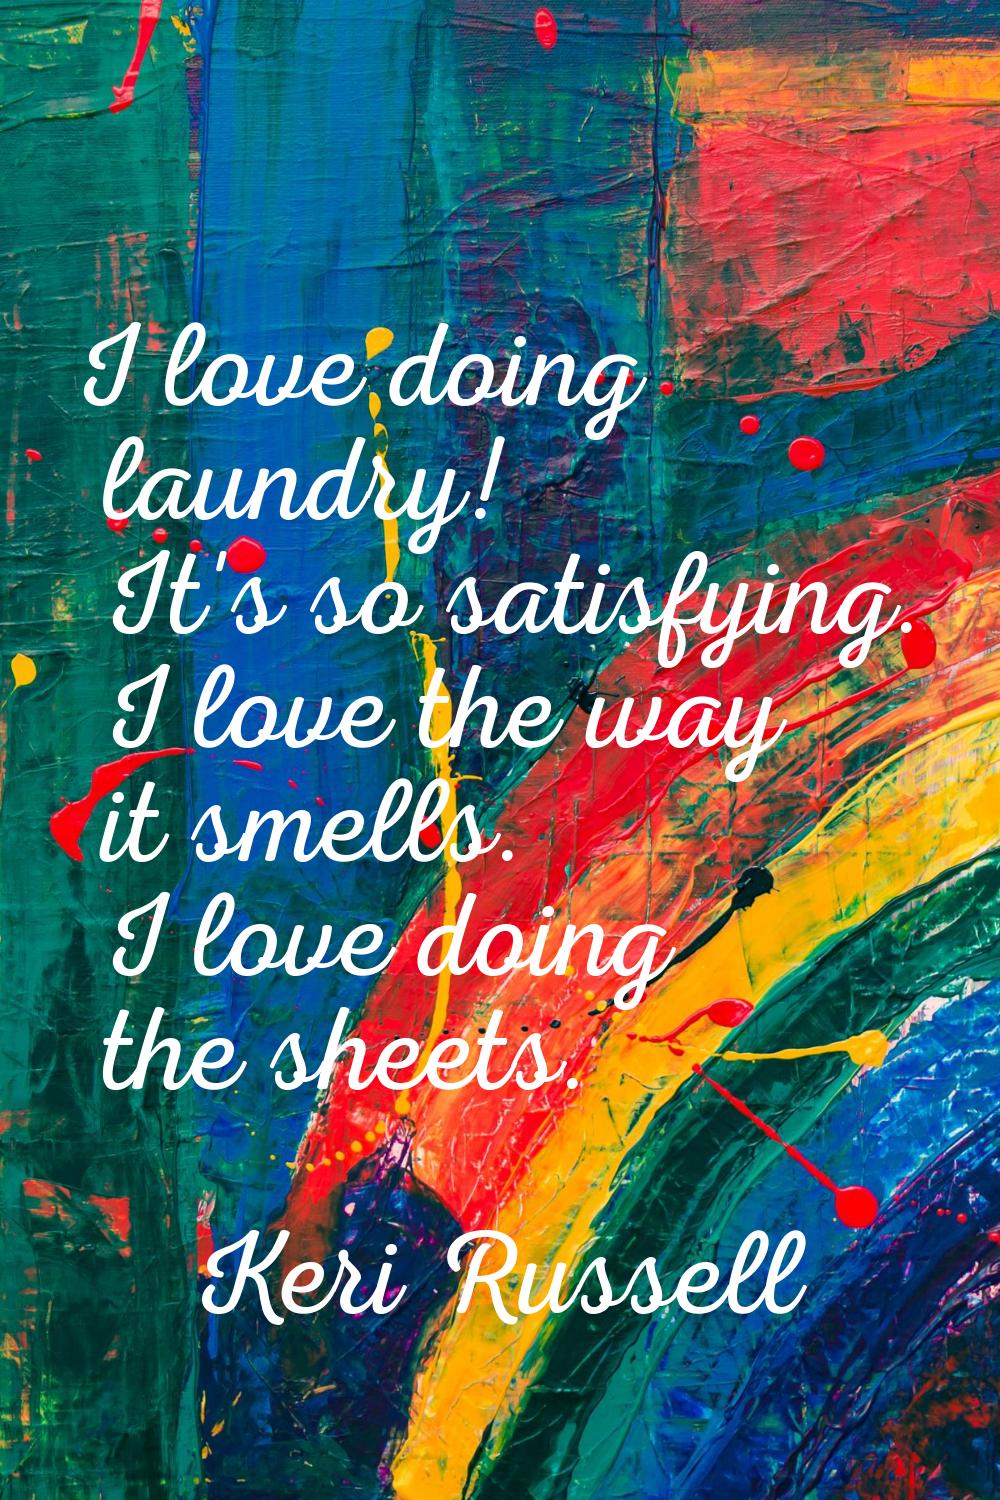 I love doing laundry! It's so satisfying. I love the way it smells. I love doing the sheets.